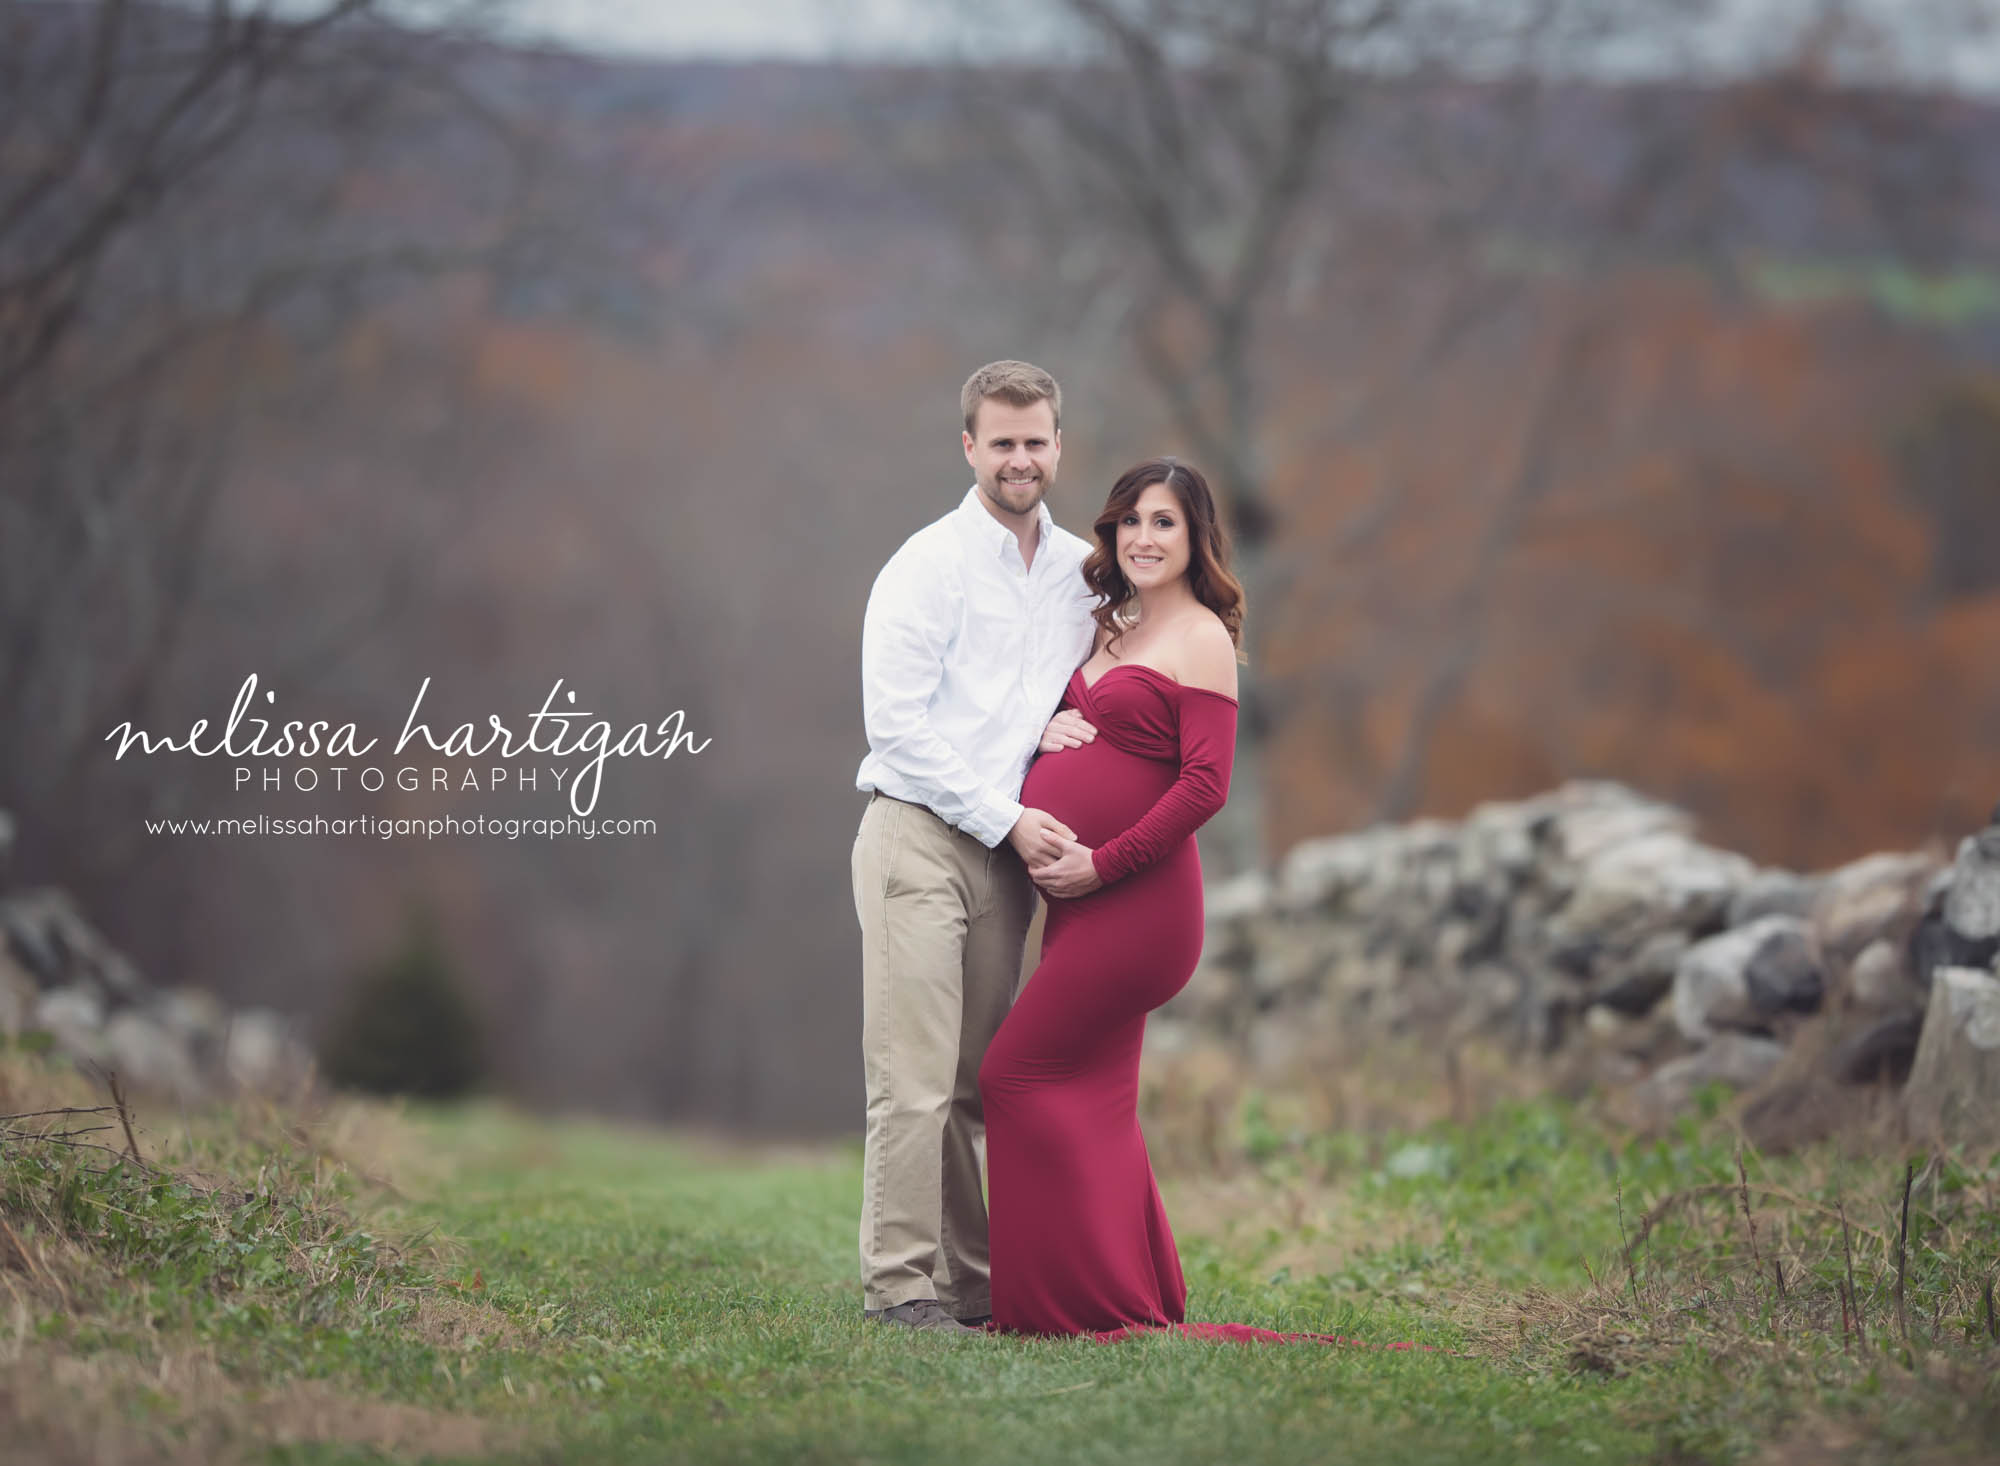 Melissa Hartigan Photography Coventry CT Newborn & Maternity Photographer Coventry CT Maternity Newborn Session Carrie wearing red maternity gown standing in field with husband holding baby bump